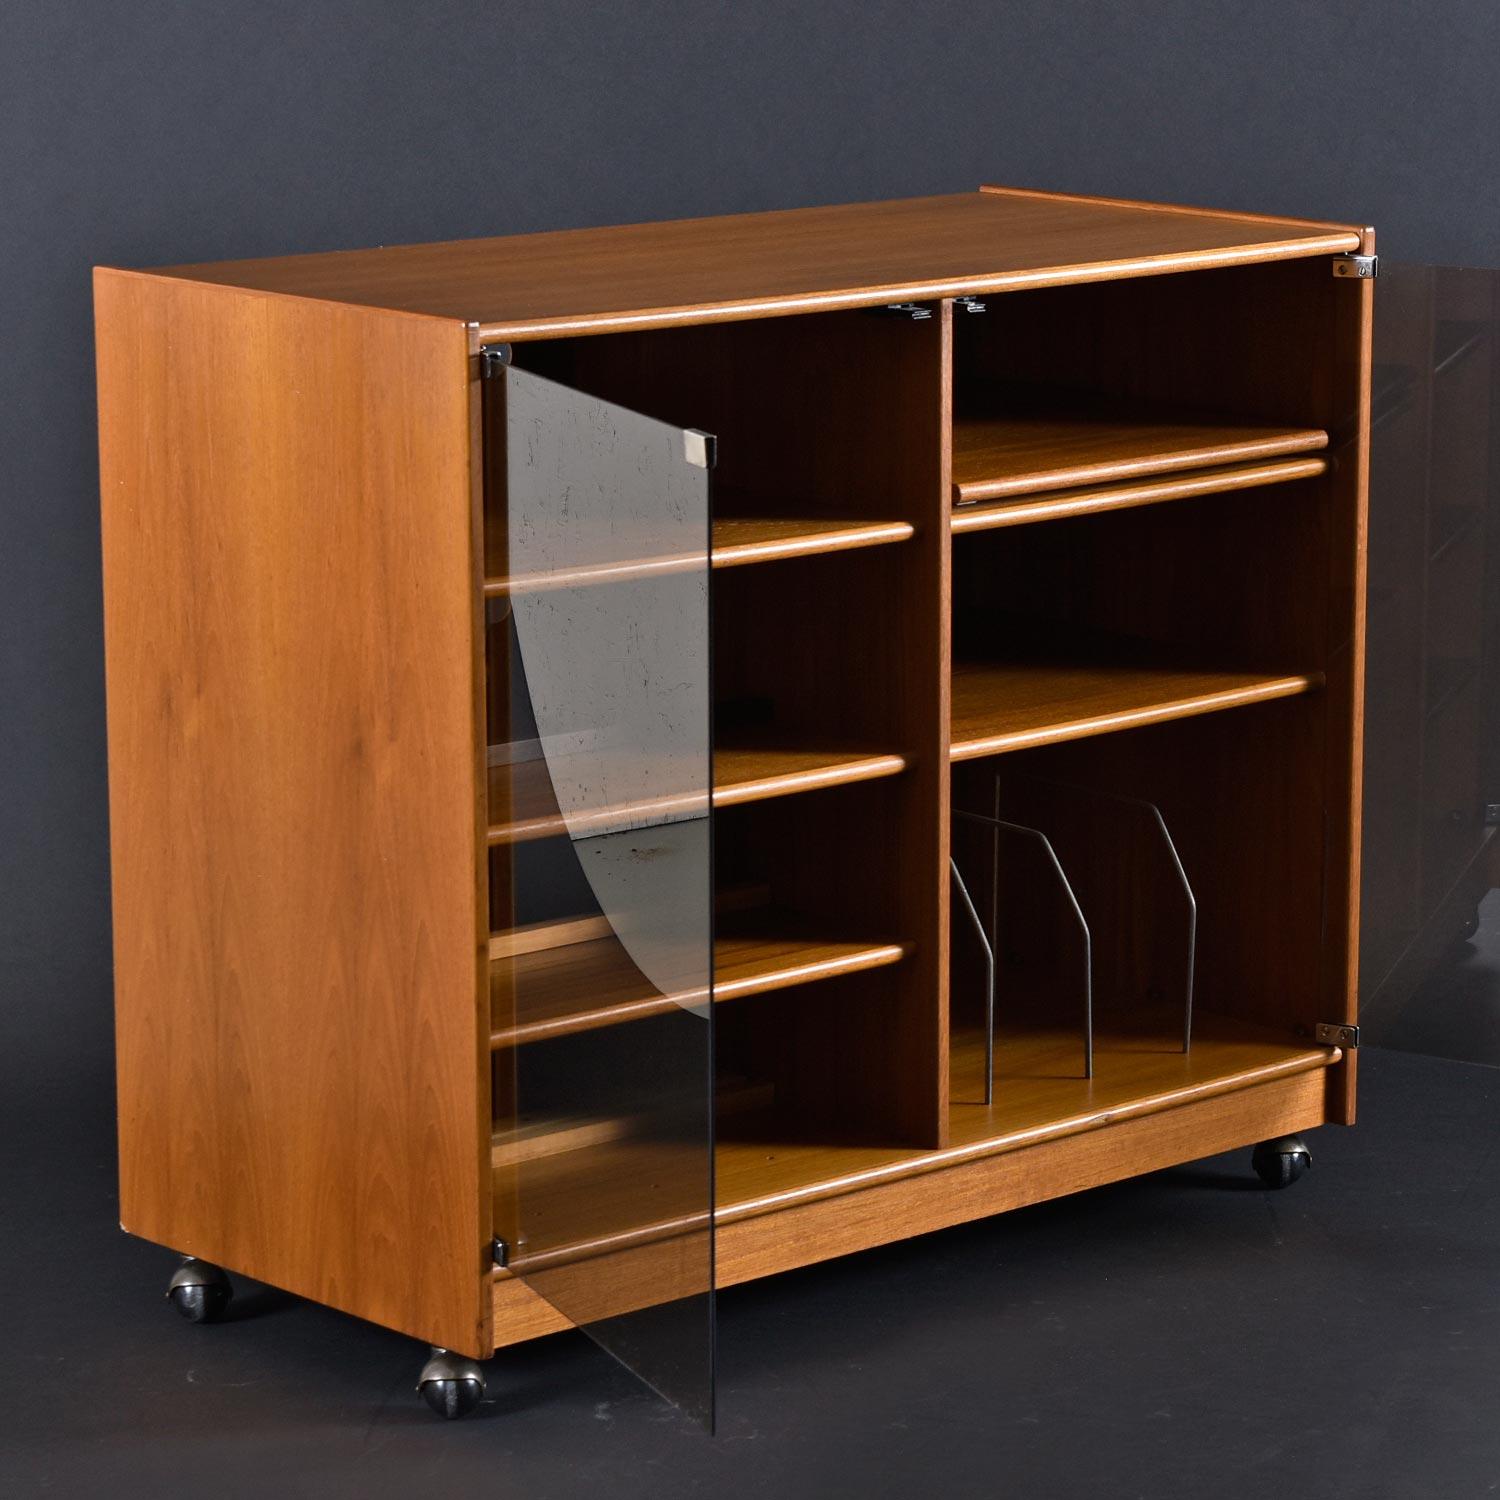 A rare and momentous find! This Nineteen-Laties era (1970s-1990s) vintage stereo cabinet is the perfect storage solution for audio enthusiasts. It seems whenever we are looking for a stereo cabinet, they are no where to be found. These babies pack